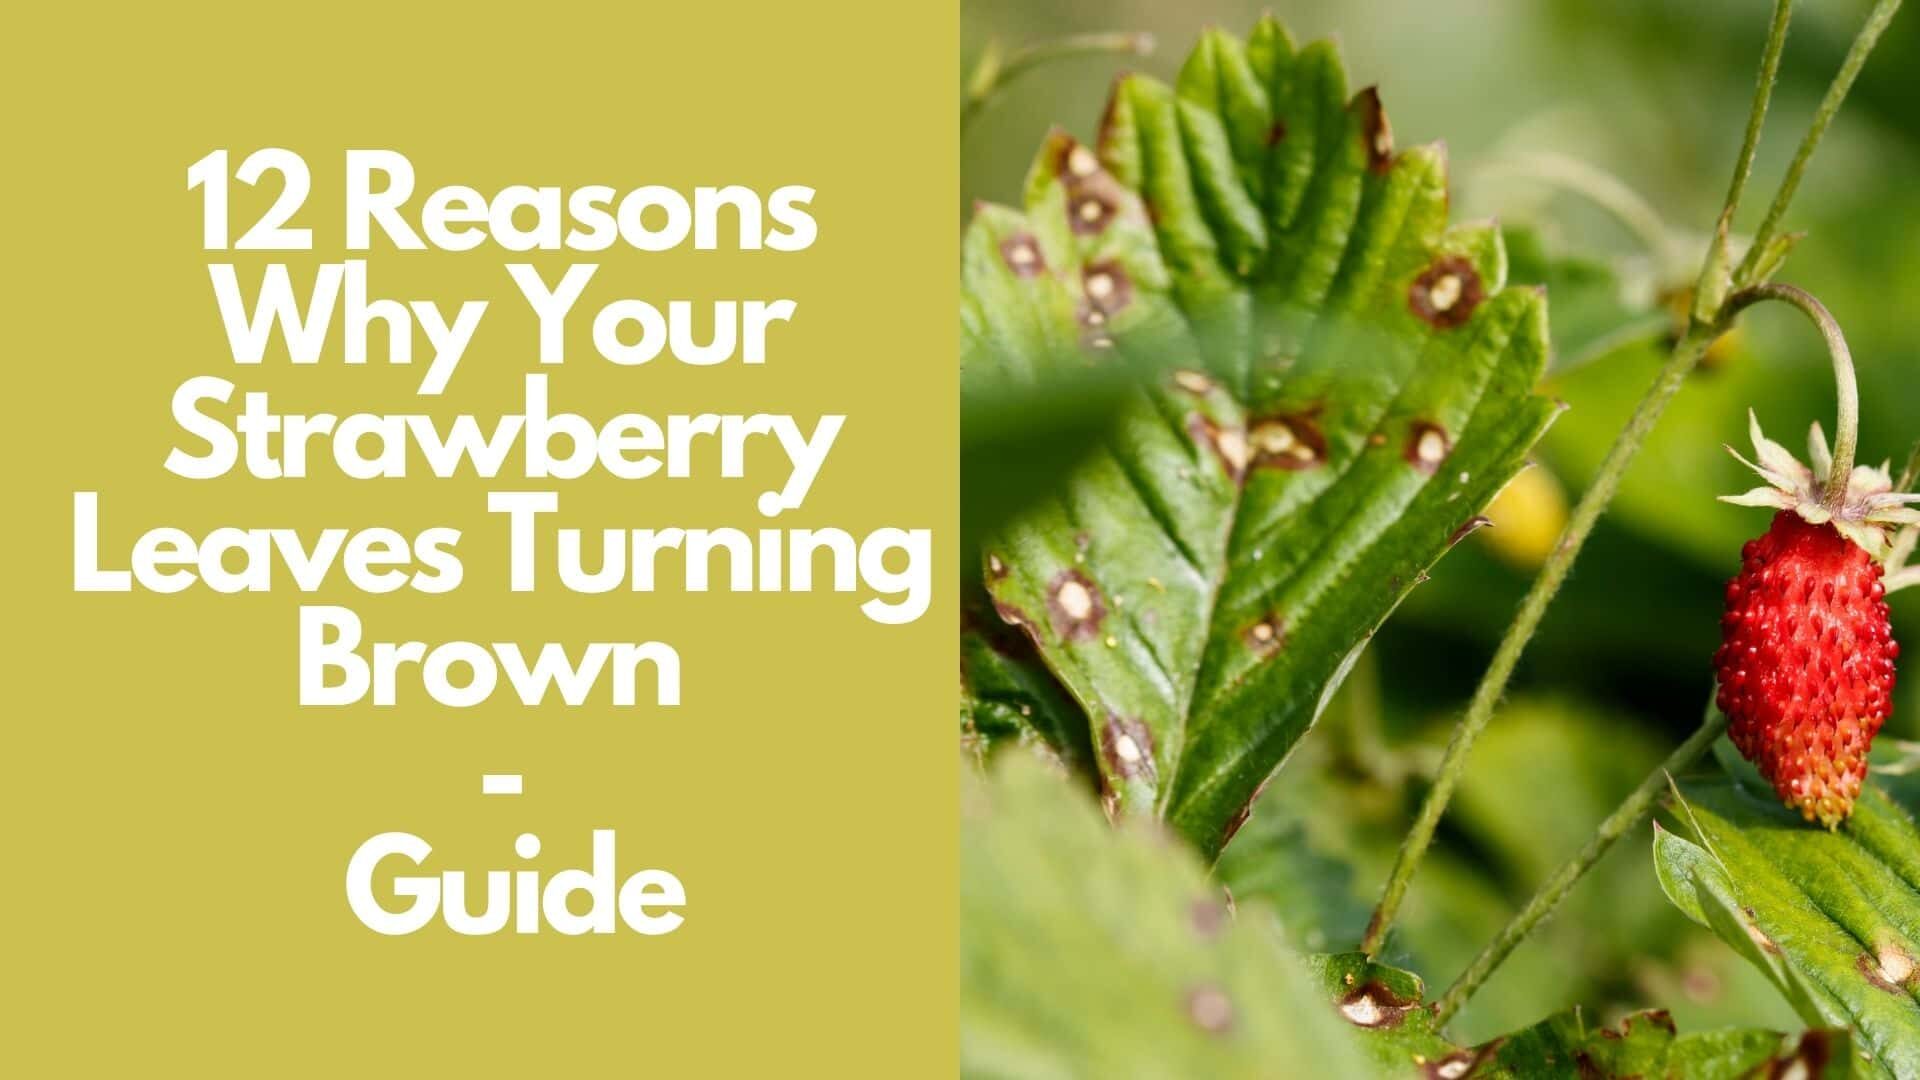 12 Reasons Why Your Strawberry Leaves Turning Brown | Guide